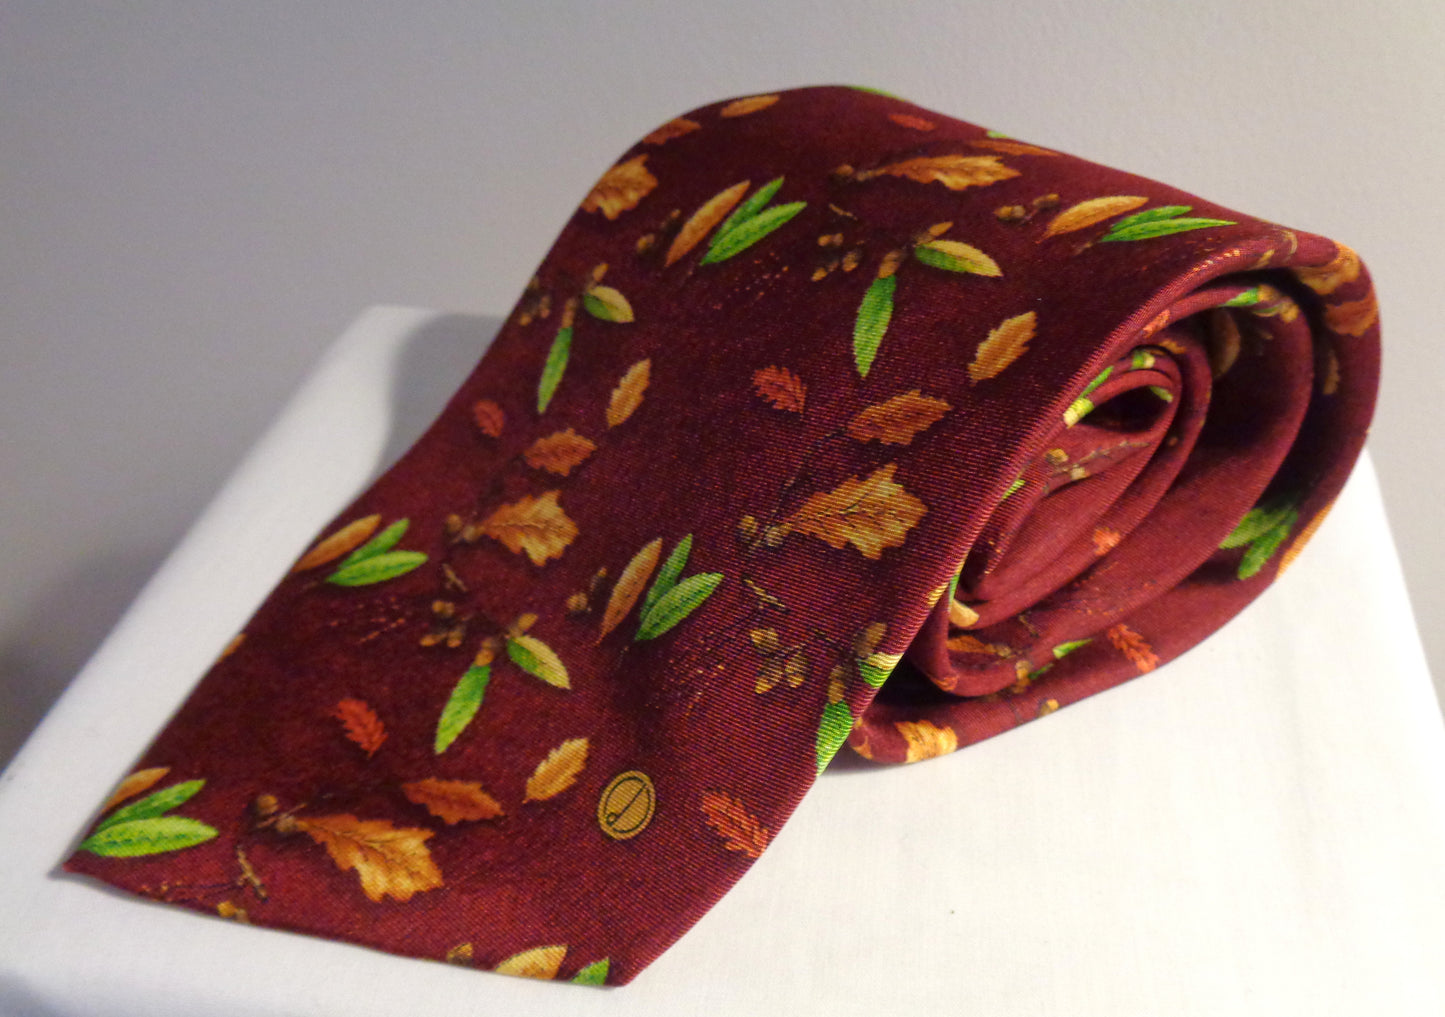 Vintage Dunhill Silk Tie Burgundy With Green/Brown Oak Leaves and Acorn Motifs